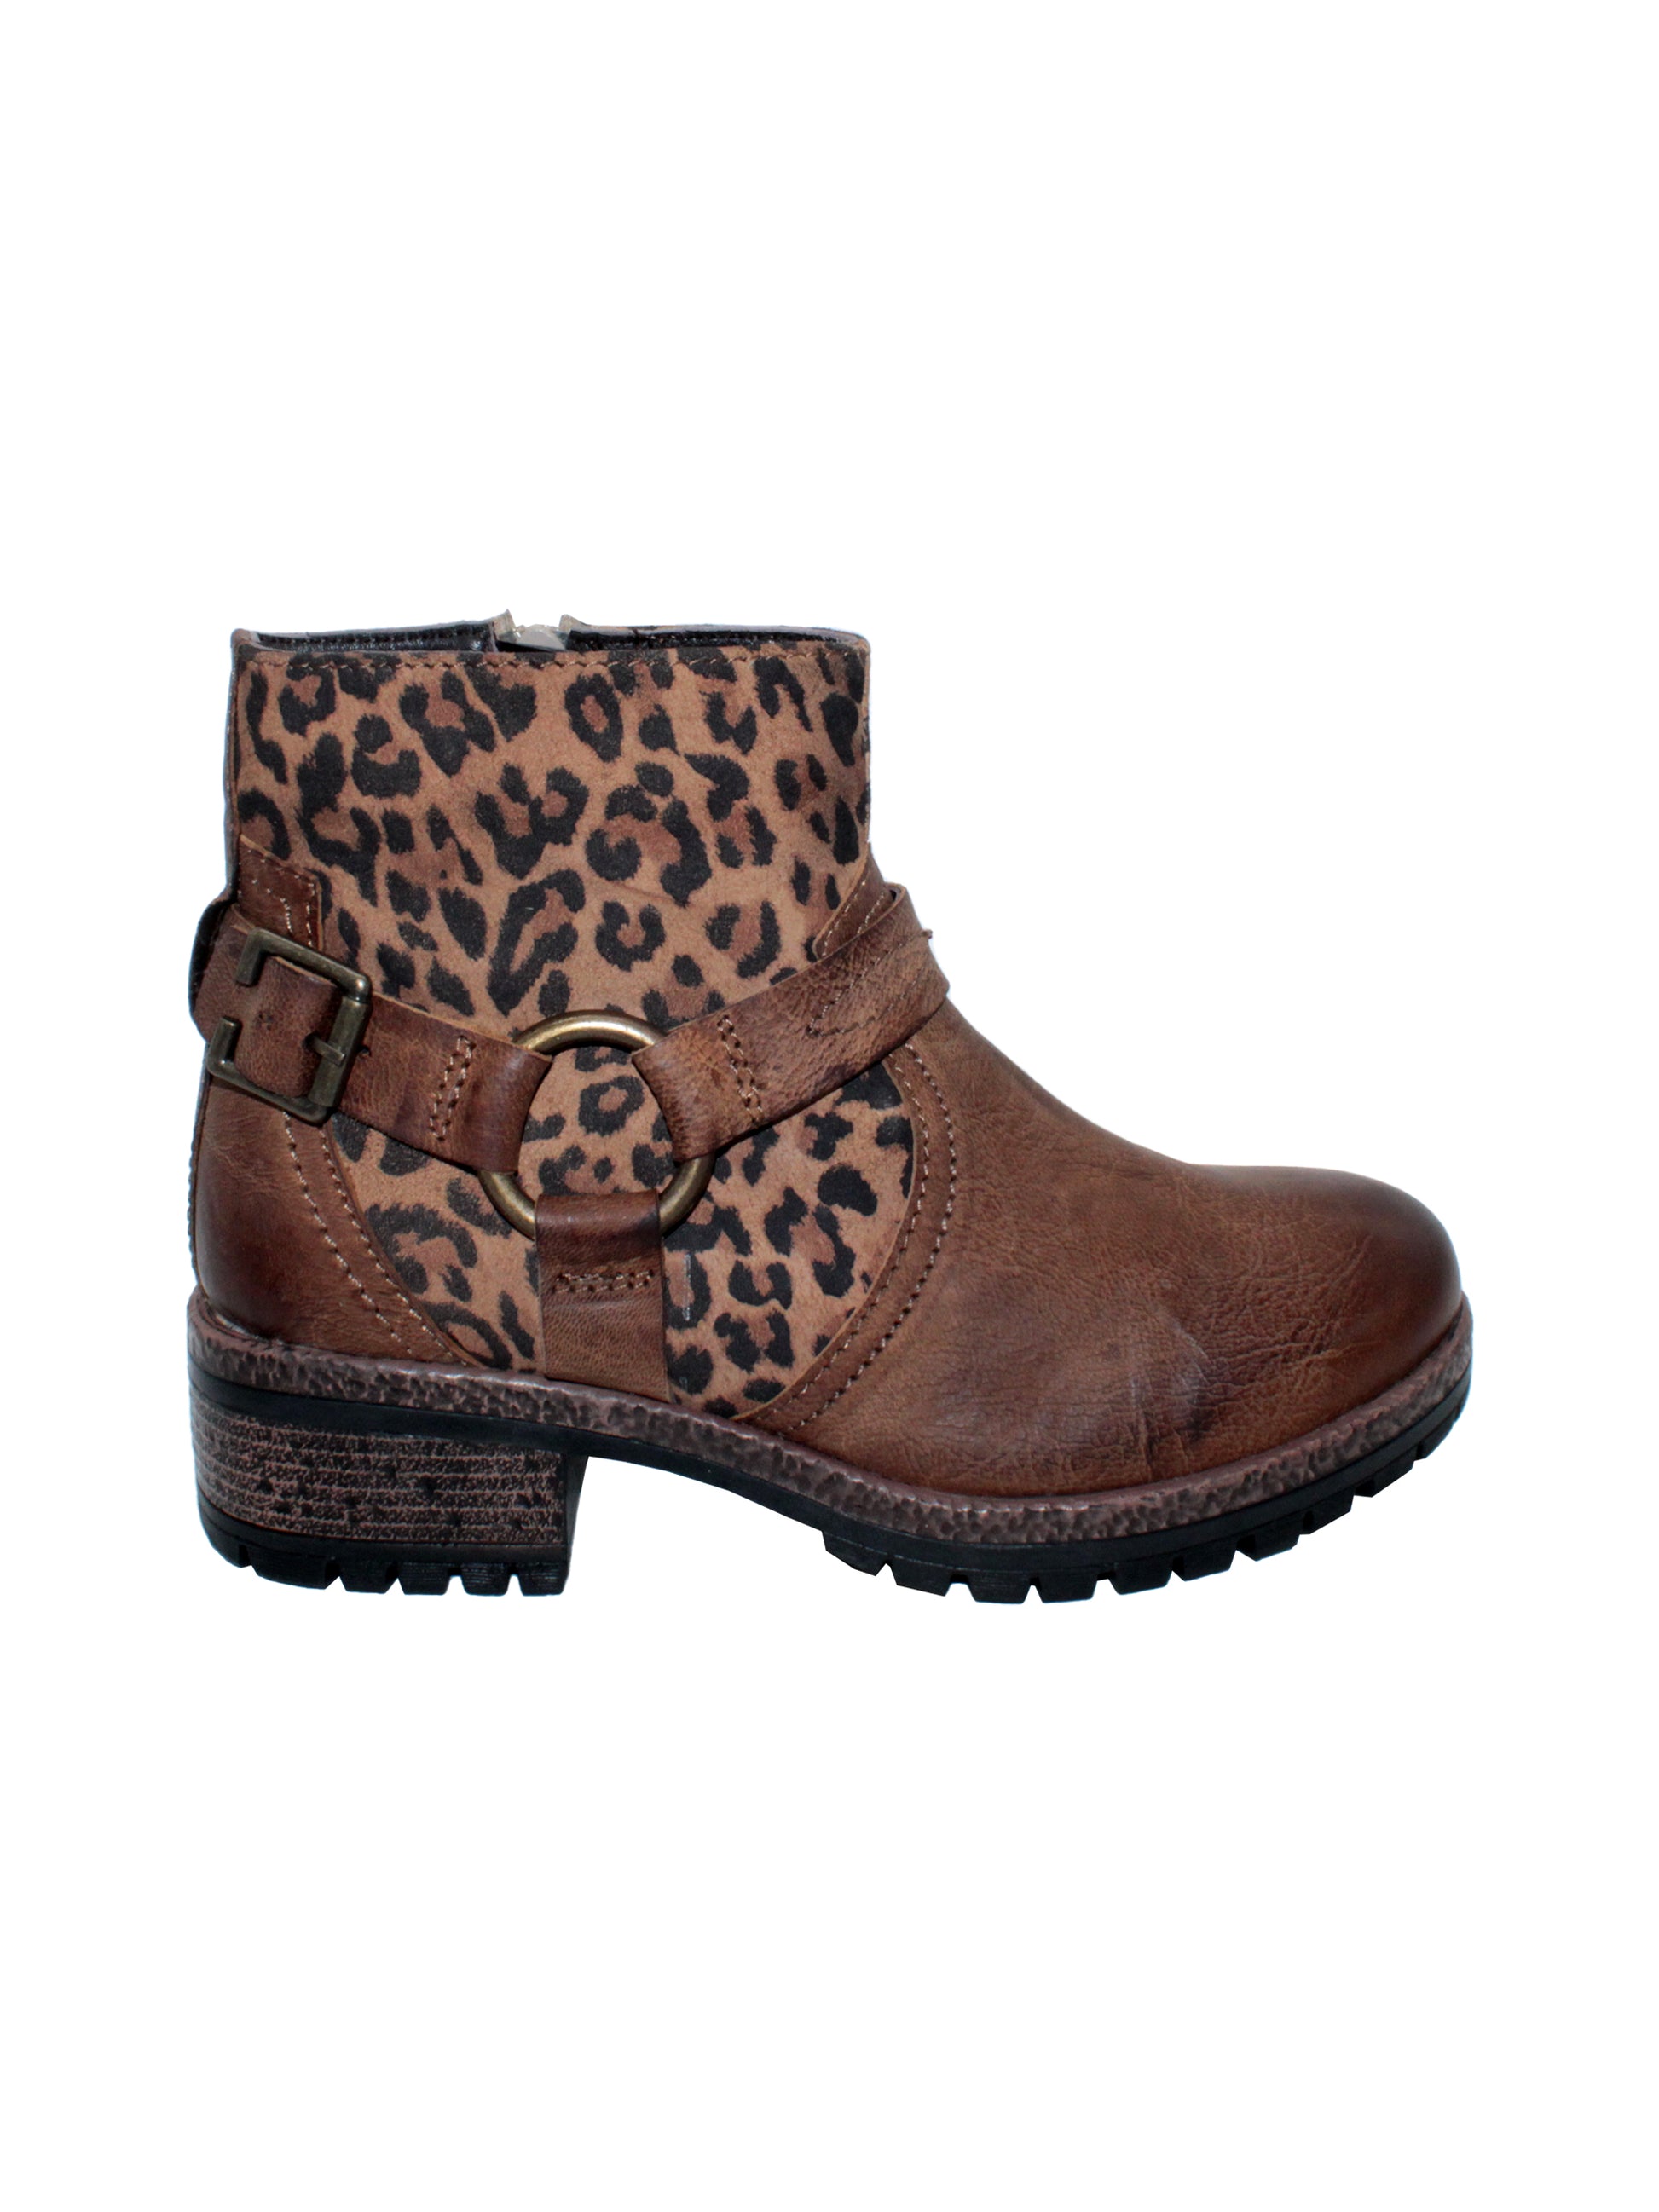 Leather and microfiber leopard printed upper Harness detail with metal buckle and O rings Internal nylon zipper Easy on and off moto bootie style Padded insole Approx. 4.75” shaft height Approx. 1.75" heel height Rubber lug bottom outsole side